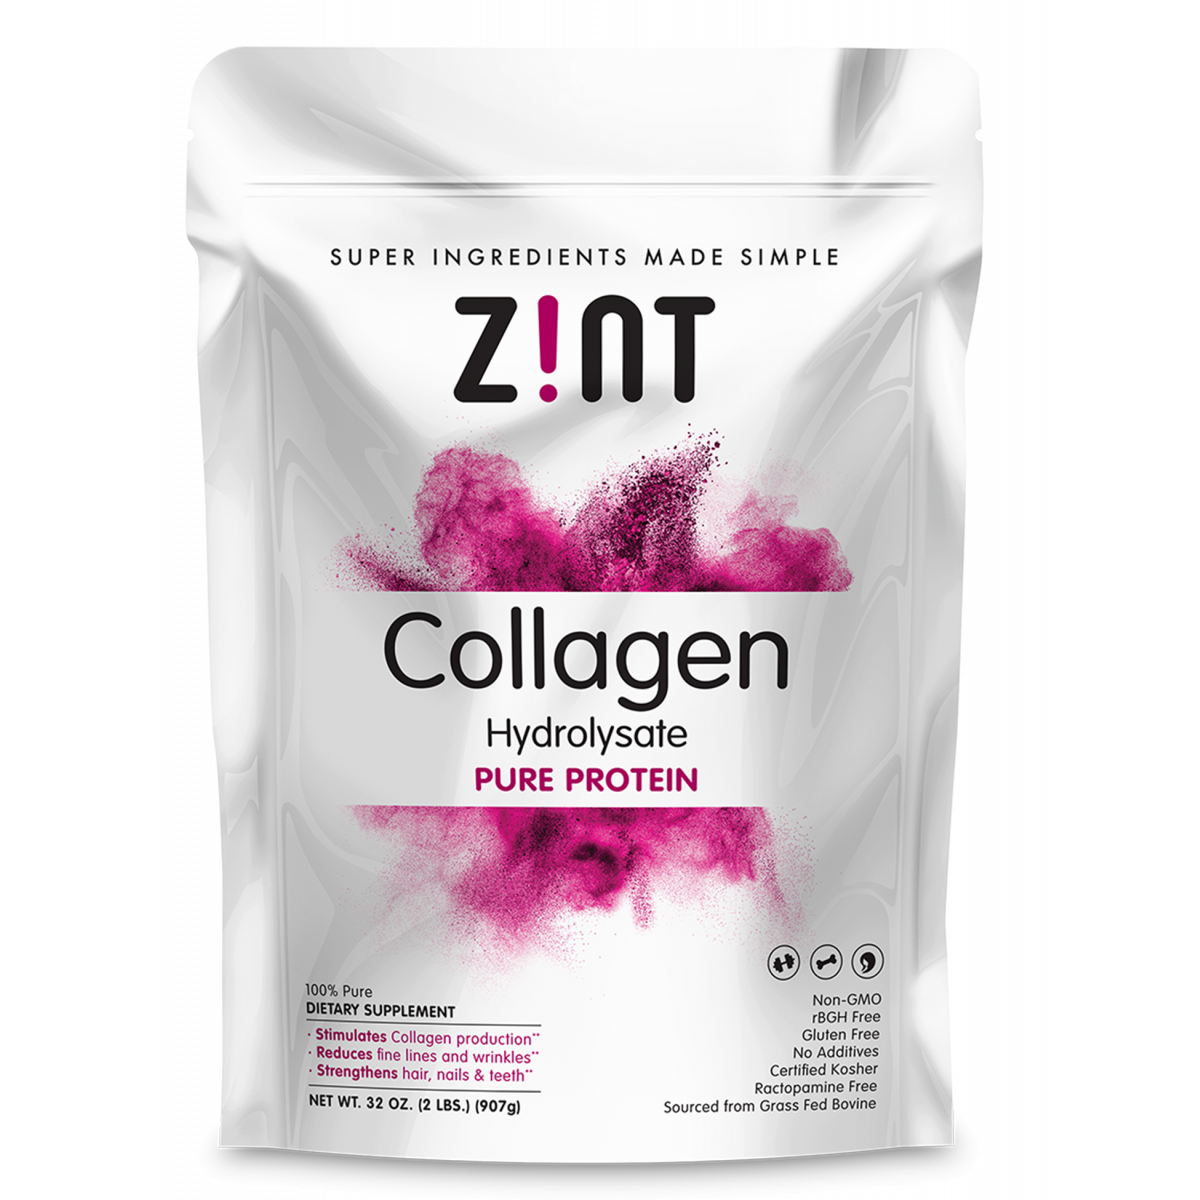 Grass-Fed Beef Collagen Hydrolyzed for optimal absorption. Collagen benefits the foundation of bulding blocks enhancing skin, hair, connective tissue and joint health..